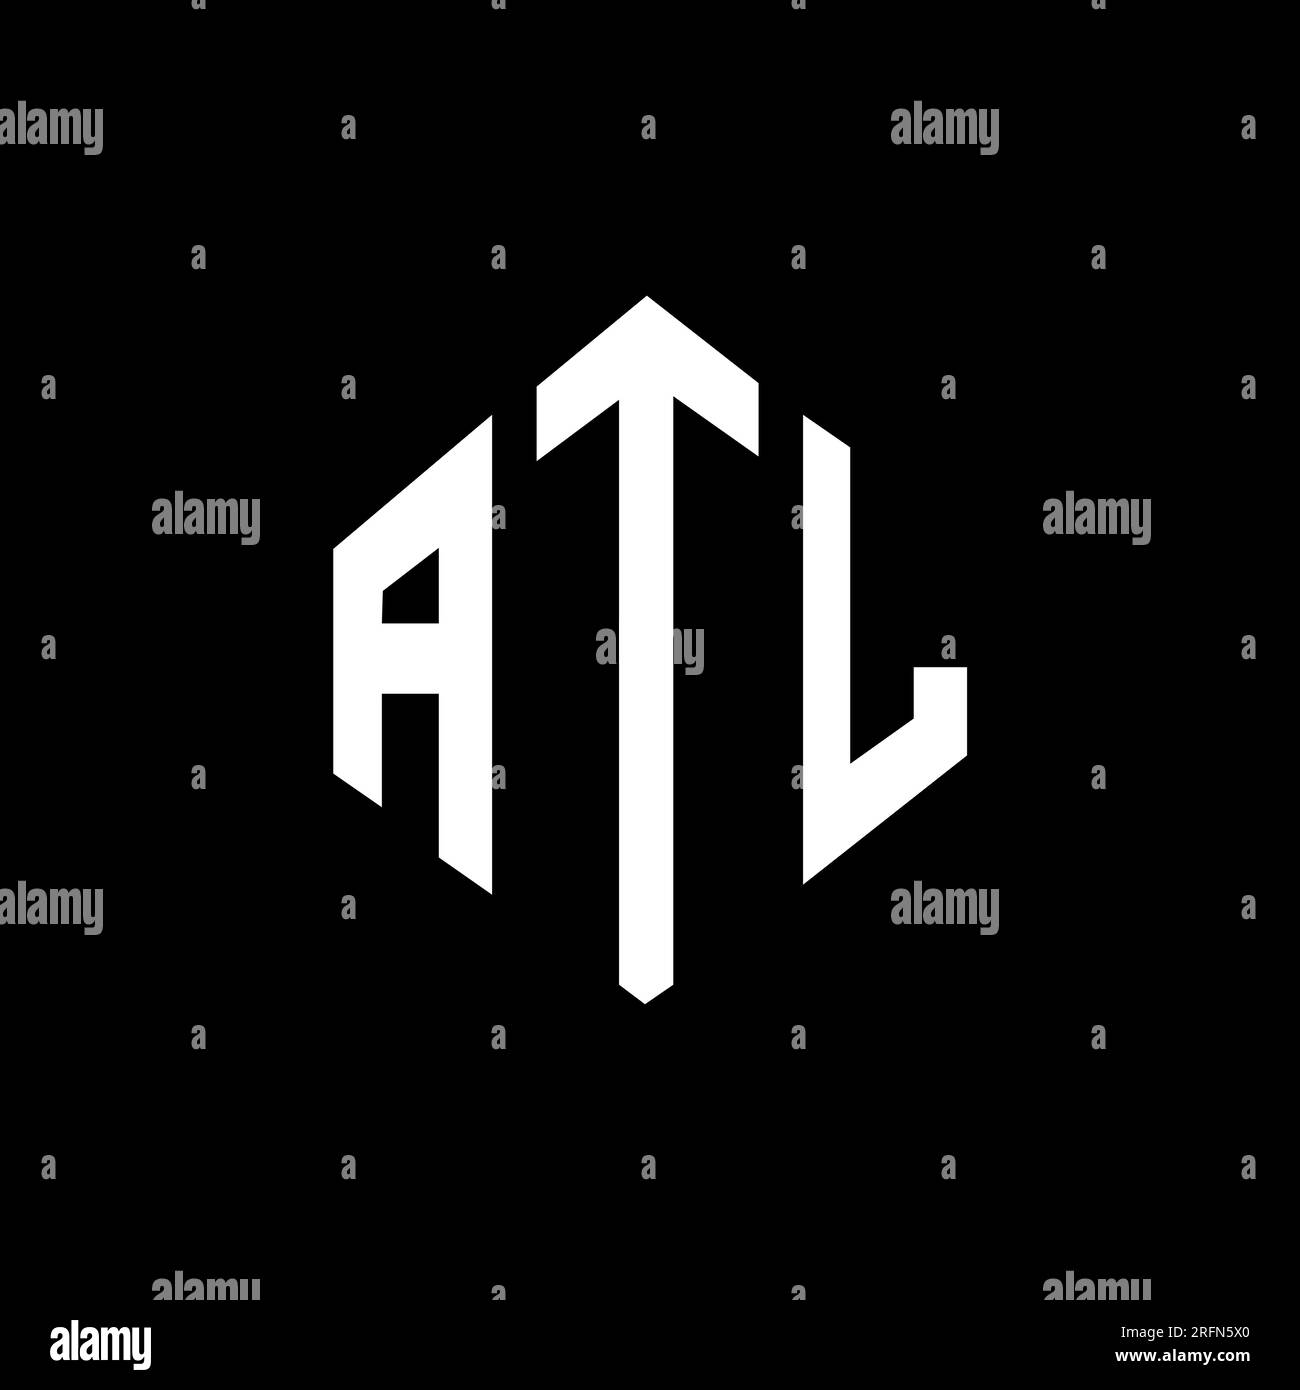 ATL letter logo design with polygon shape. ATL polygon and cube shape logo design. ATL hexagon vector logo template white and black colors. ATL monogr Stock Vector